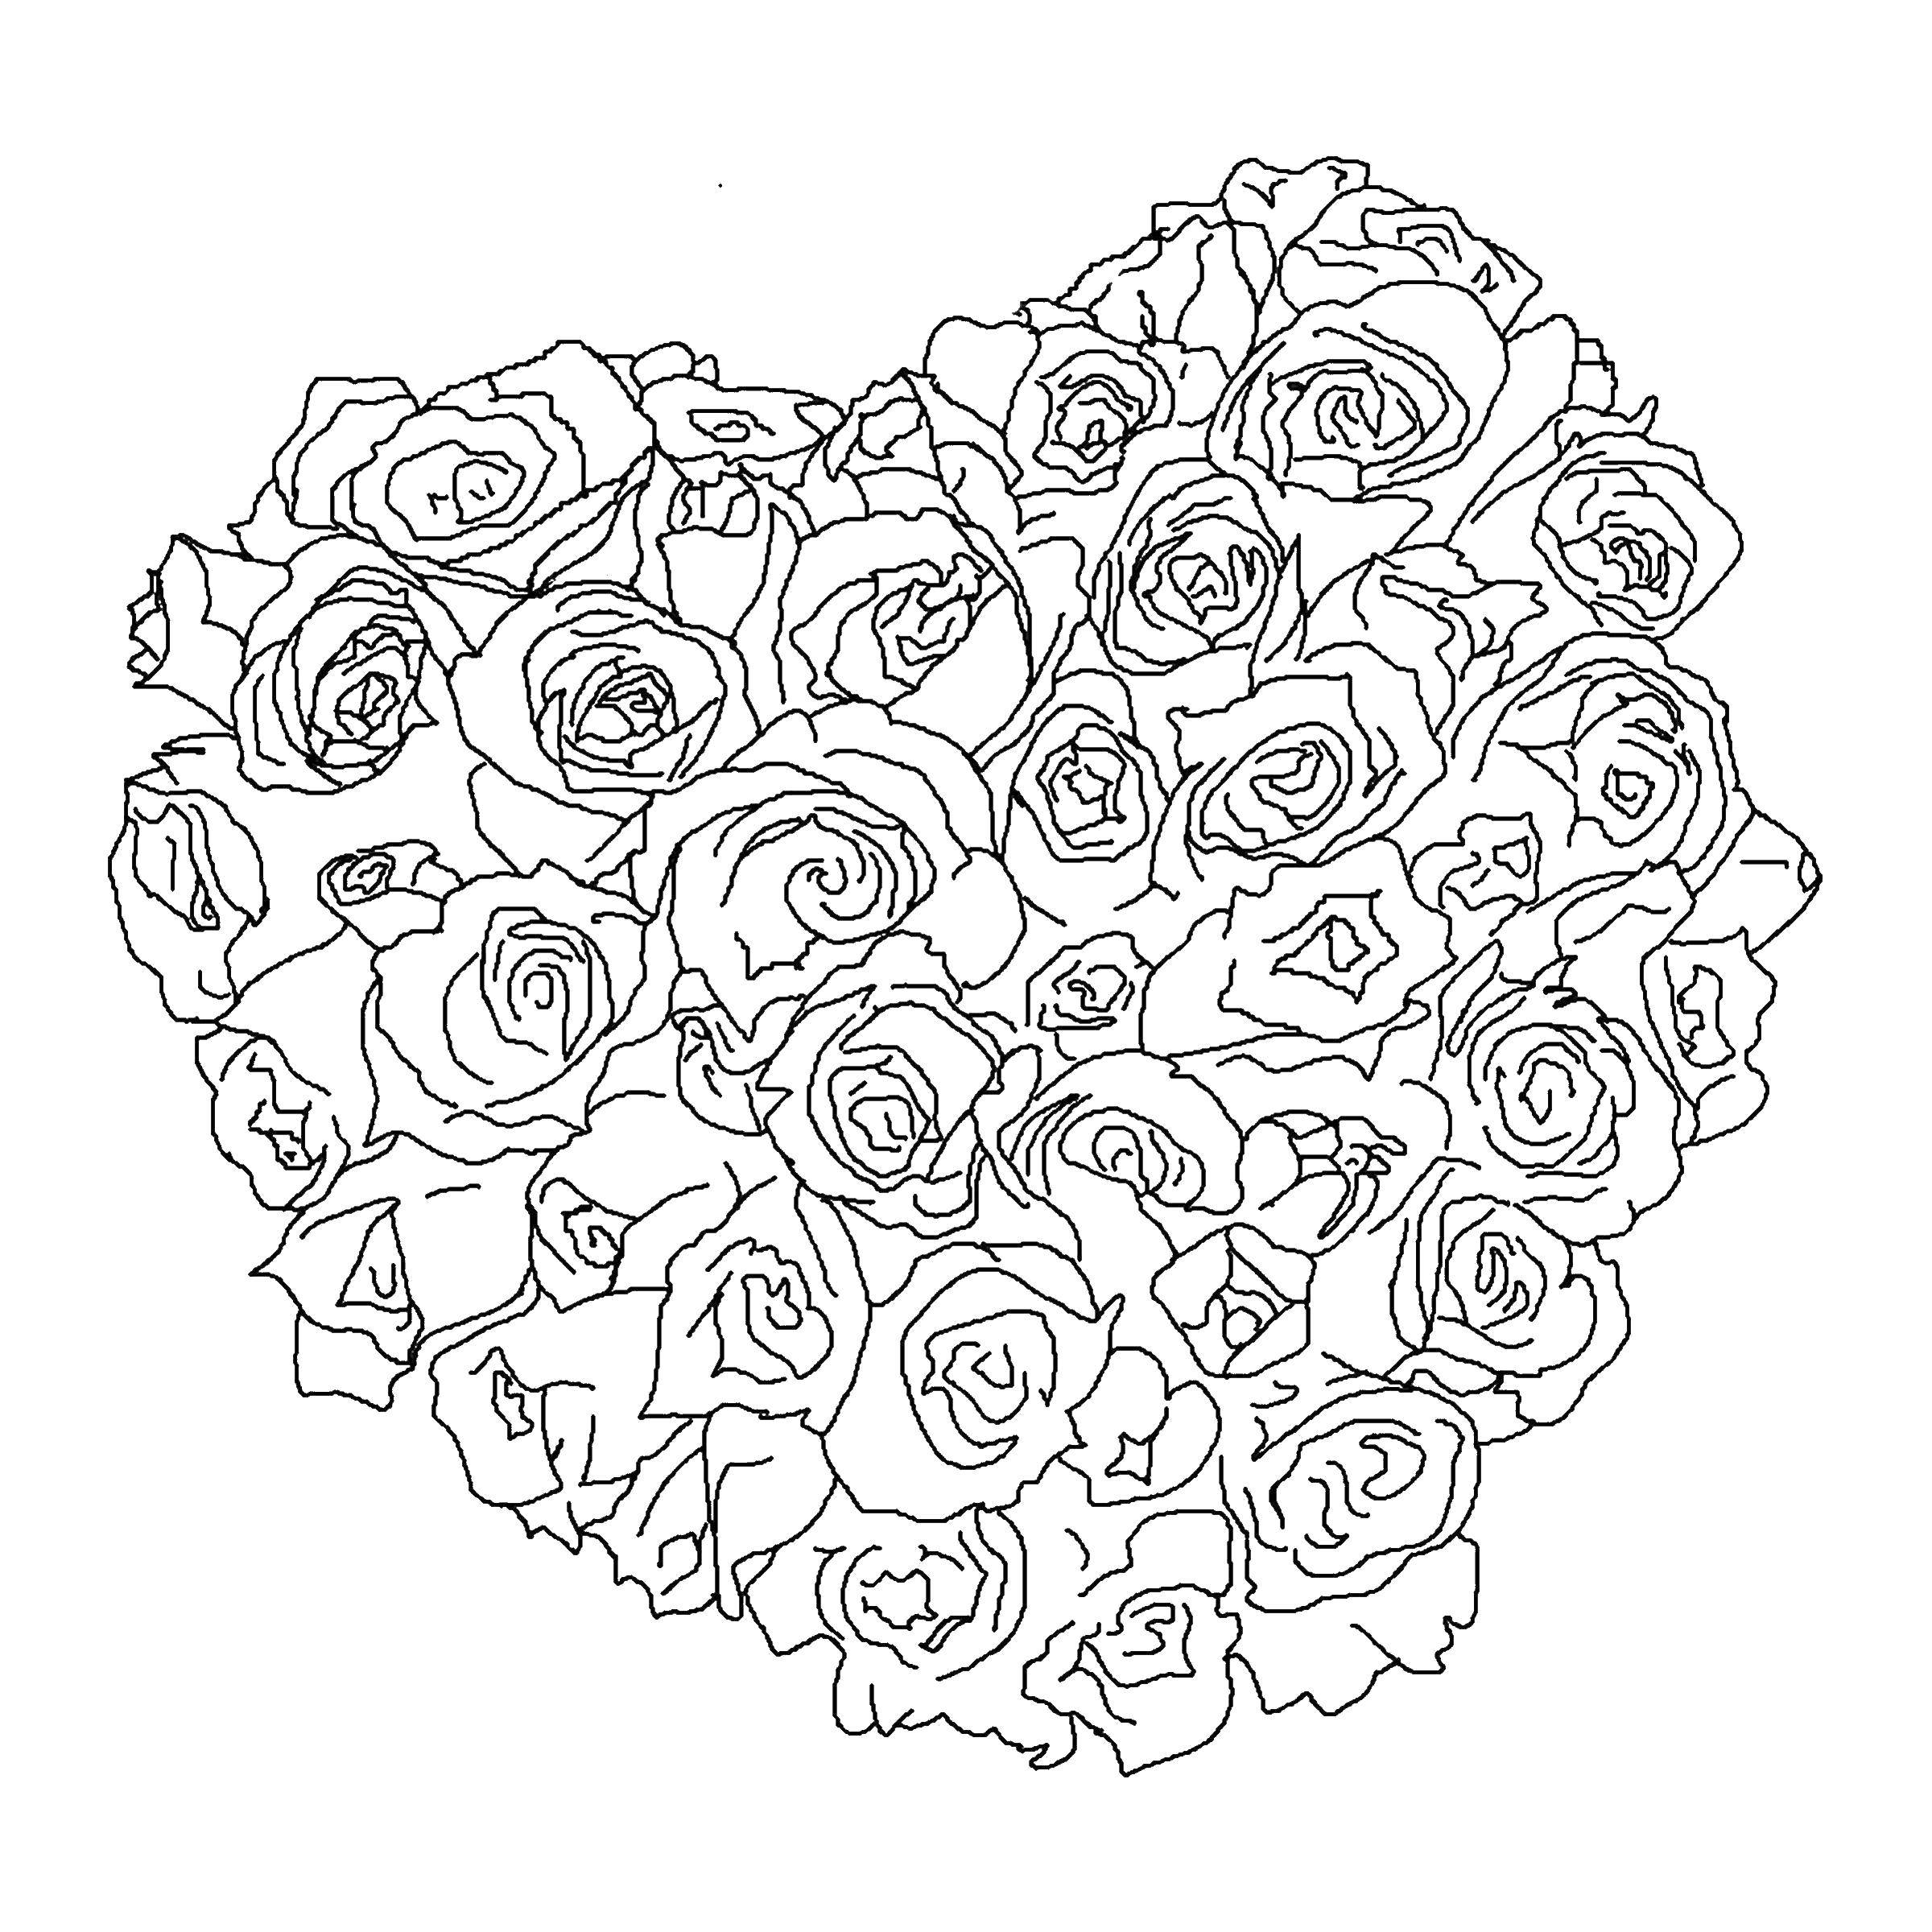 Coloring Heart of flowers. Category Valentines day. Tags:  Valentines day, love, heart, flowers.